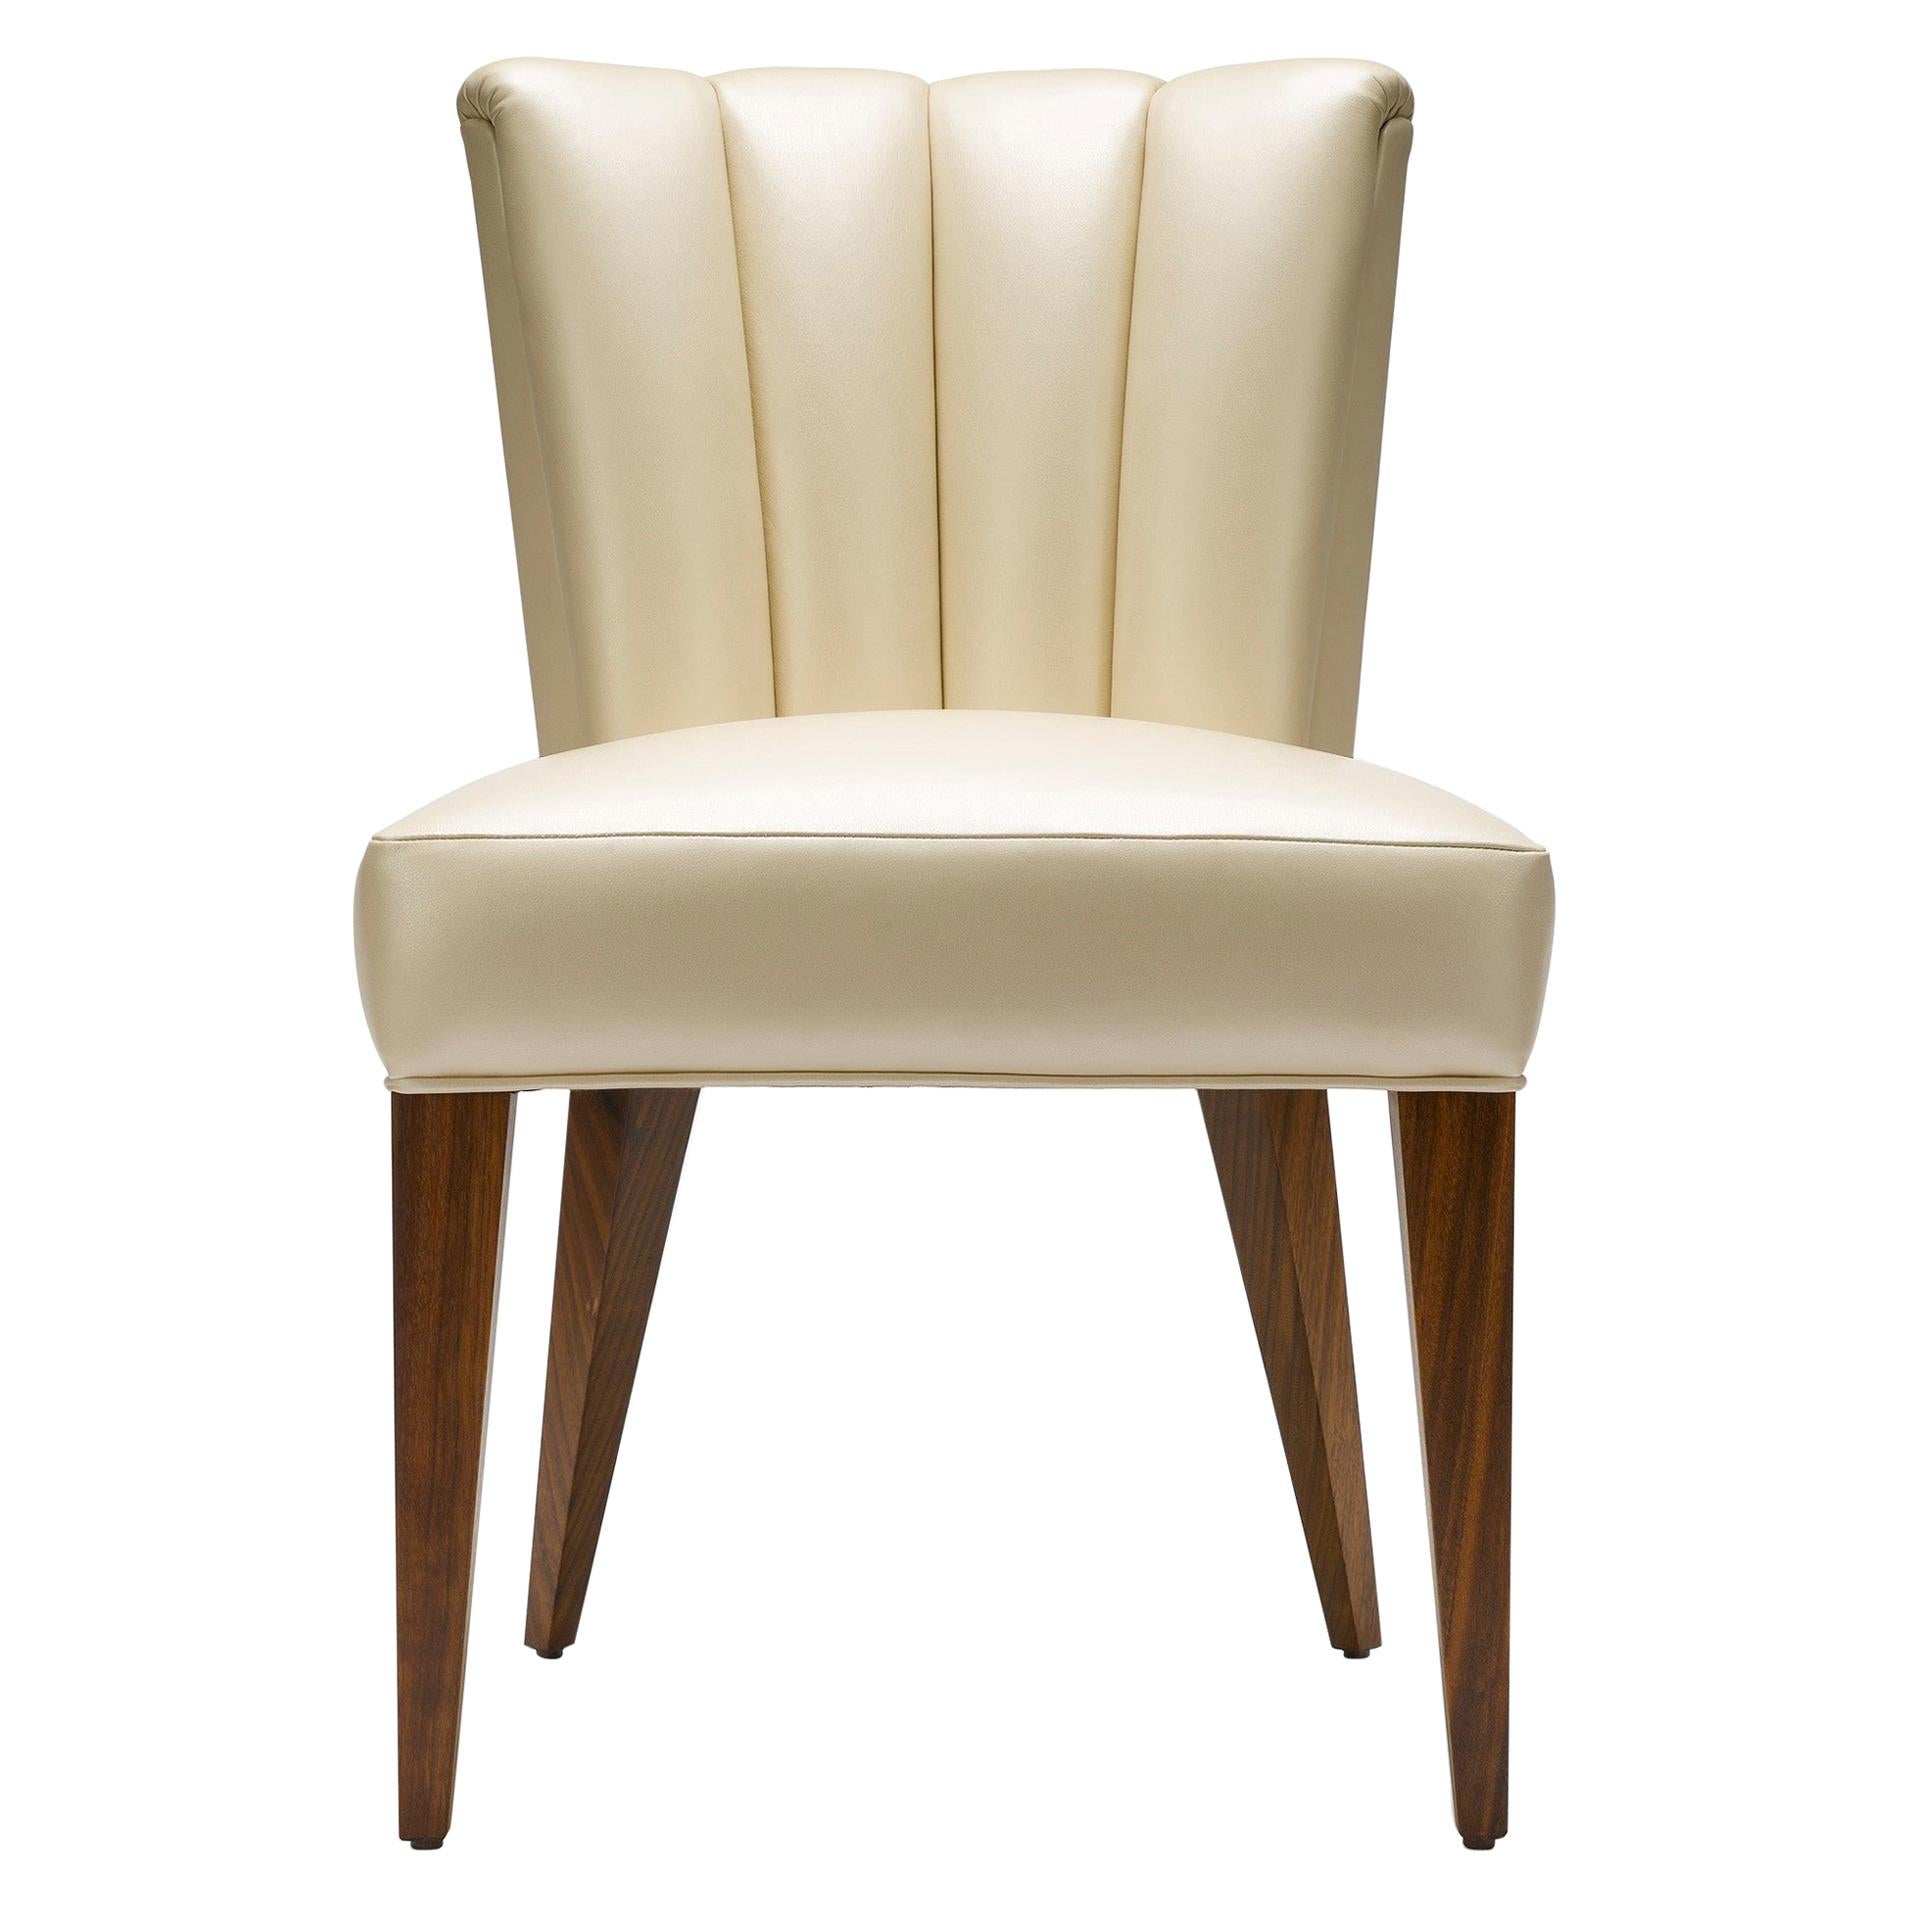 Contemporary Elodie Dining Chair in Champagne Pearlized Leather with Walnut Legs